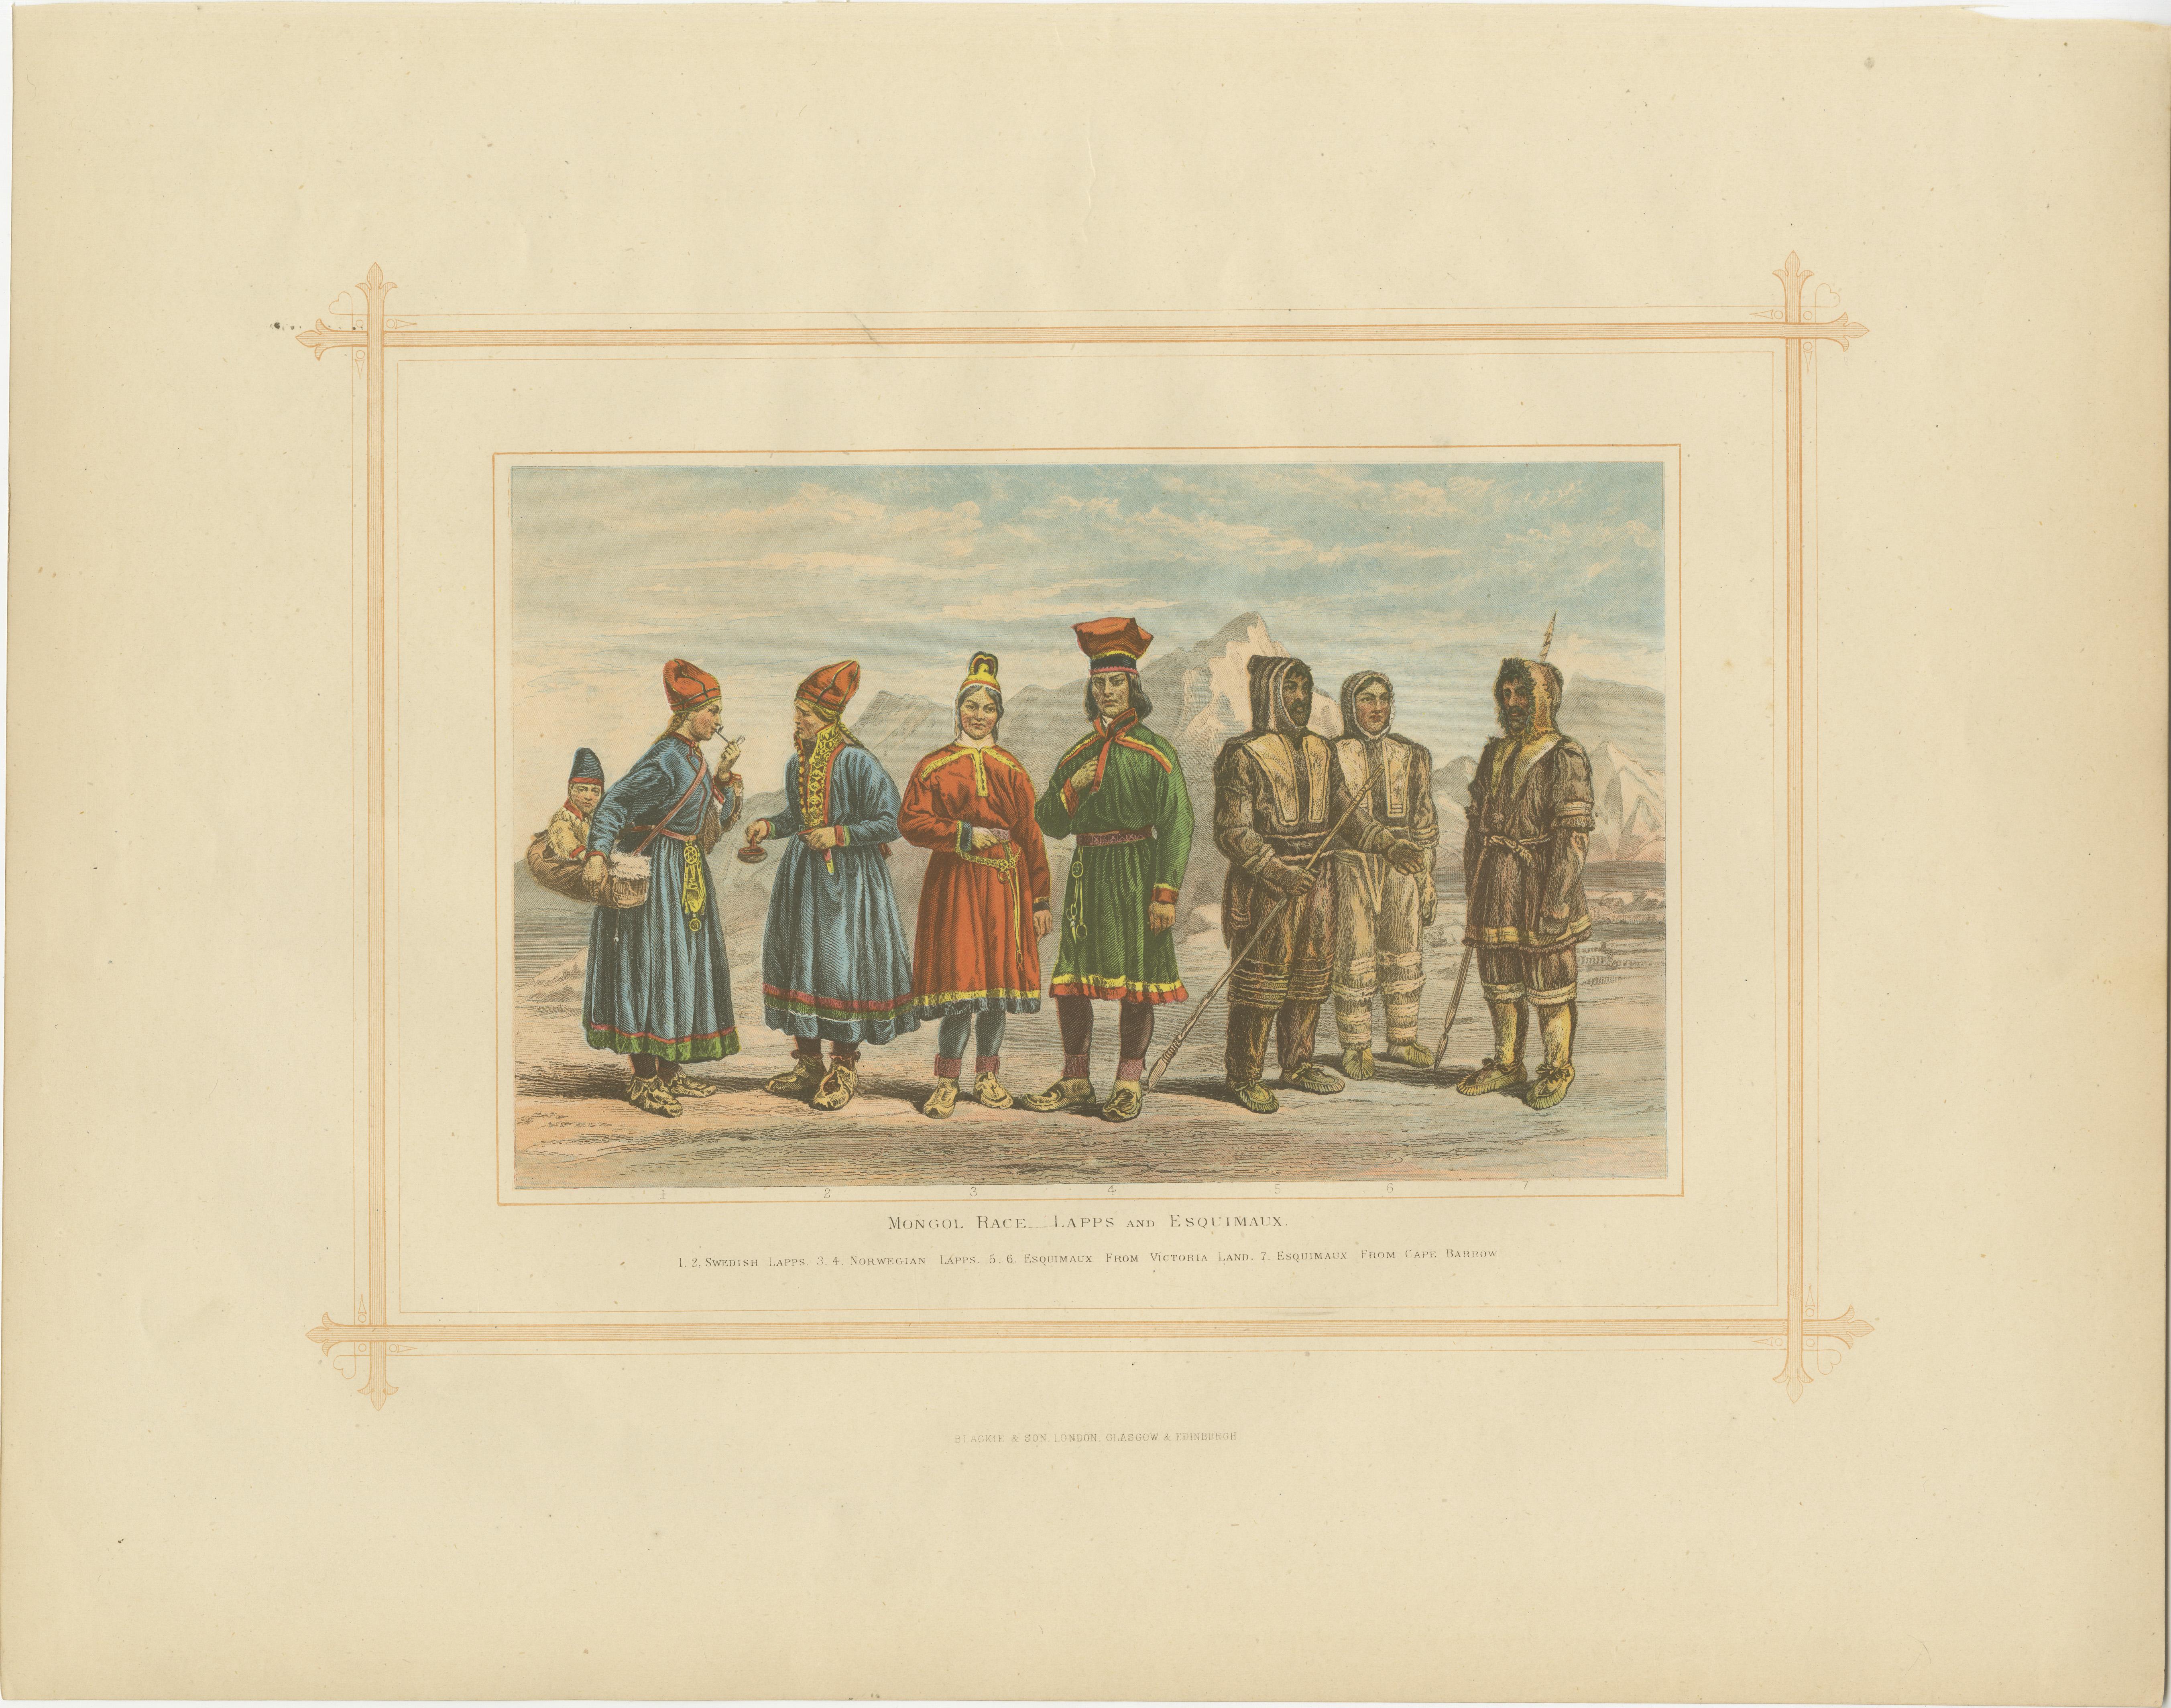 Antique Lithograph of the Mongol Race,  Lapps and Esquimaux, 1882 In Good Condition For Sale In Langweer, NL